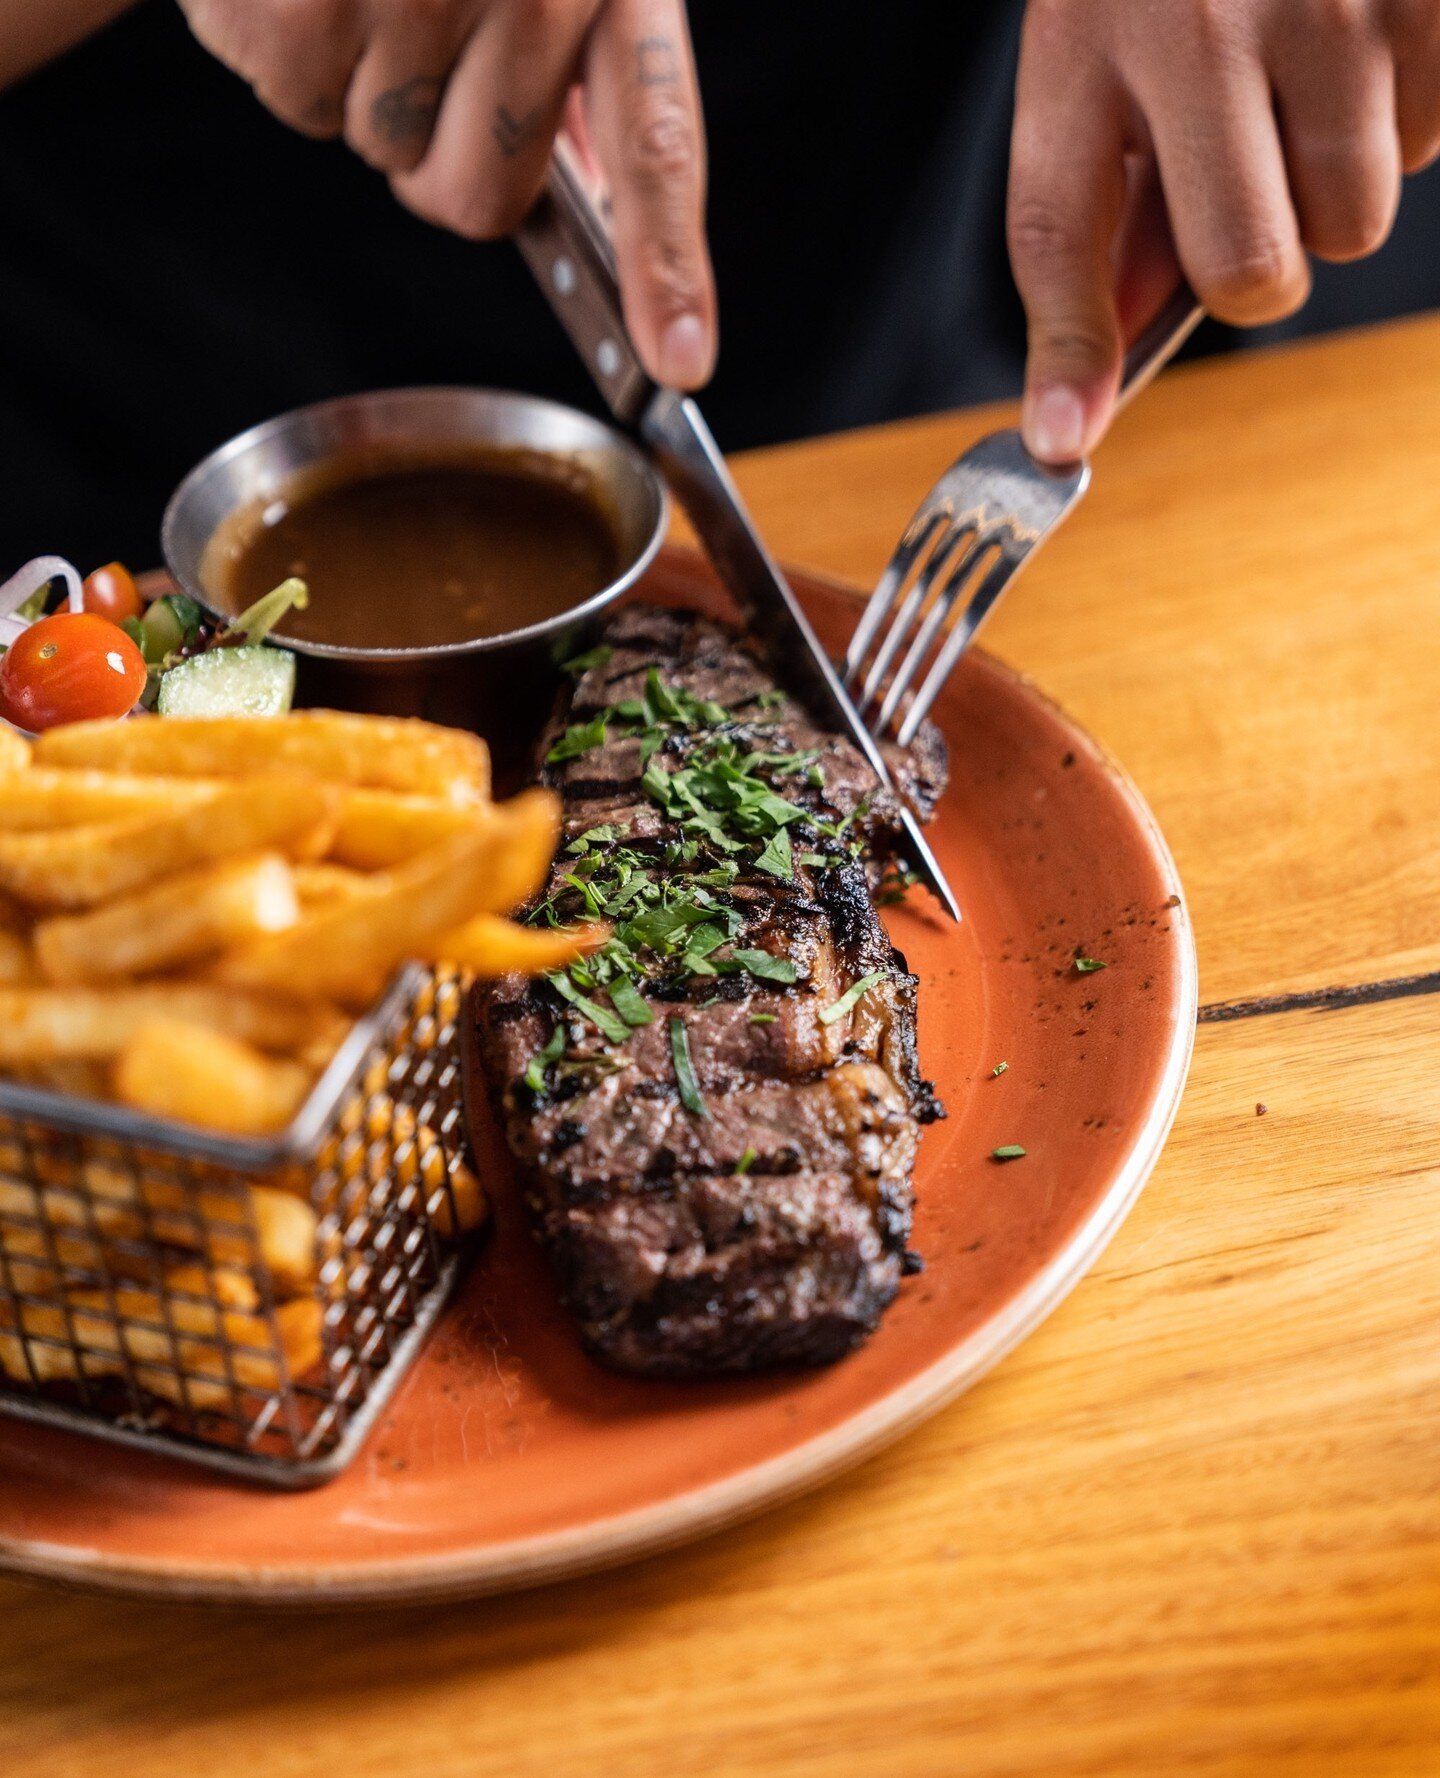 Did someone say steak? 🥩 ⁠
⁠
Enjoy one of our delicious scotch fillets with a side of chips and salad for only $30 today. Available from 12pm for dine-in only.⁠
⁠
Bookings available via link in bio